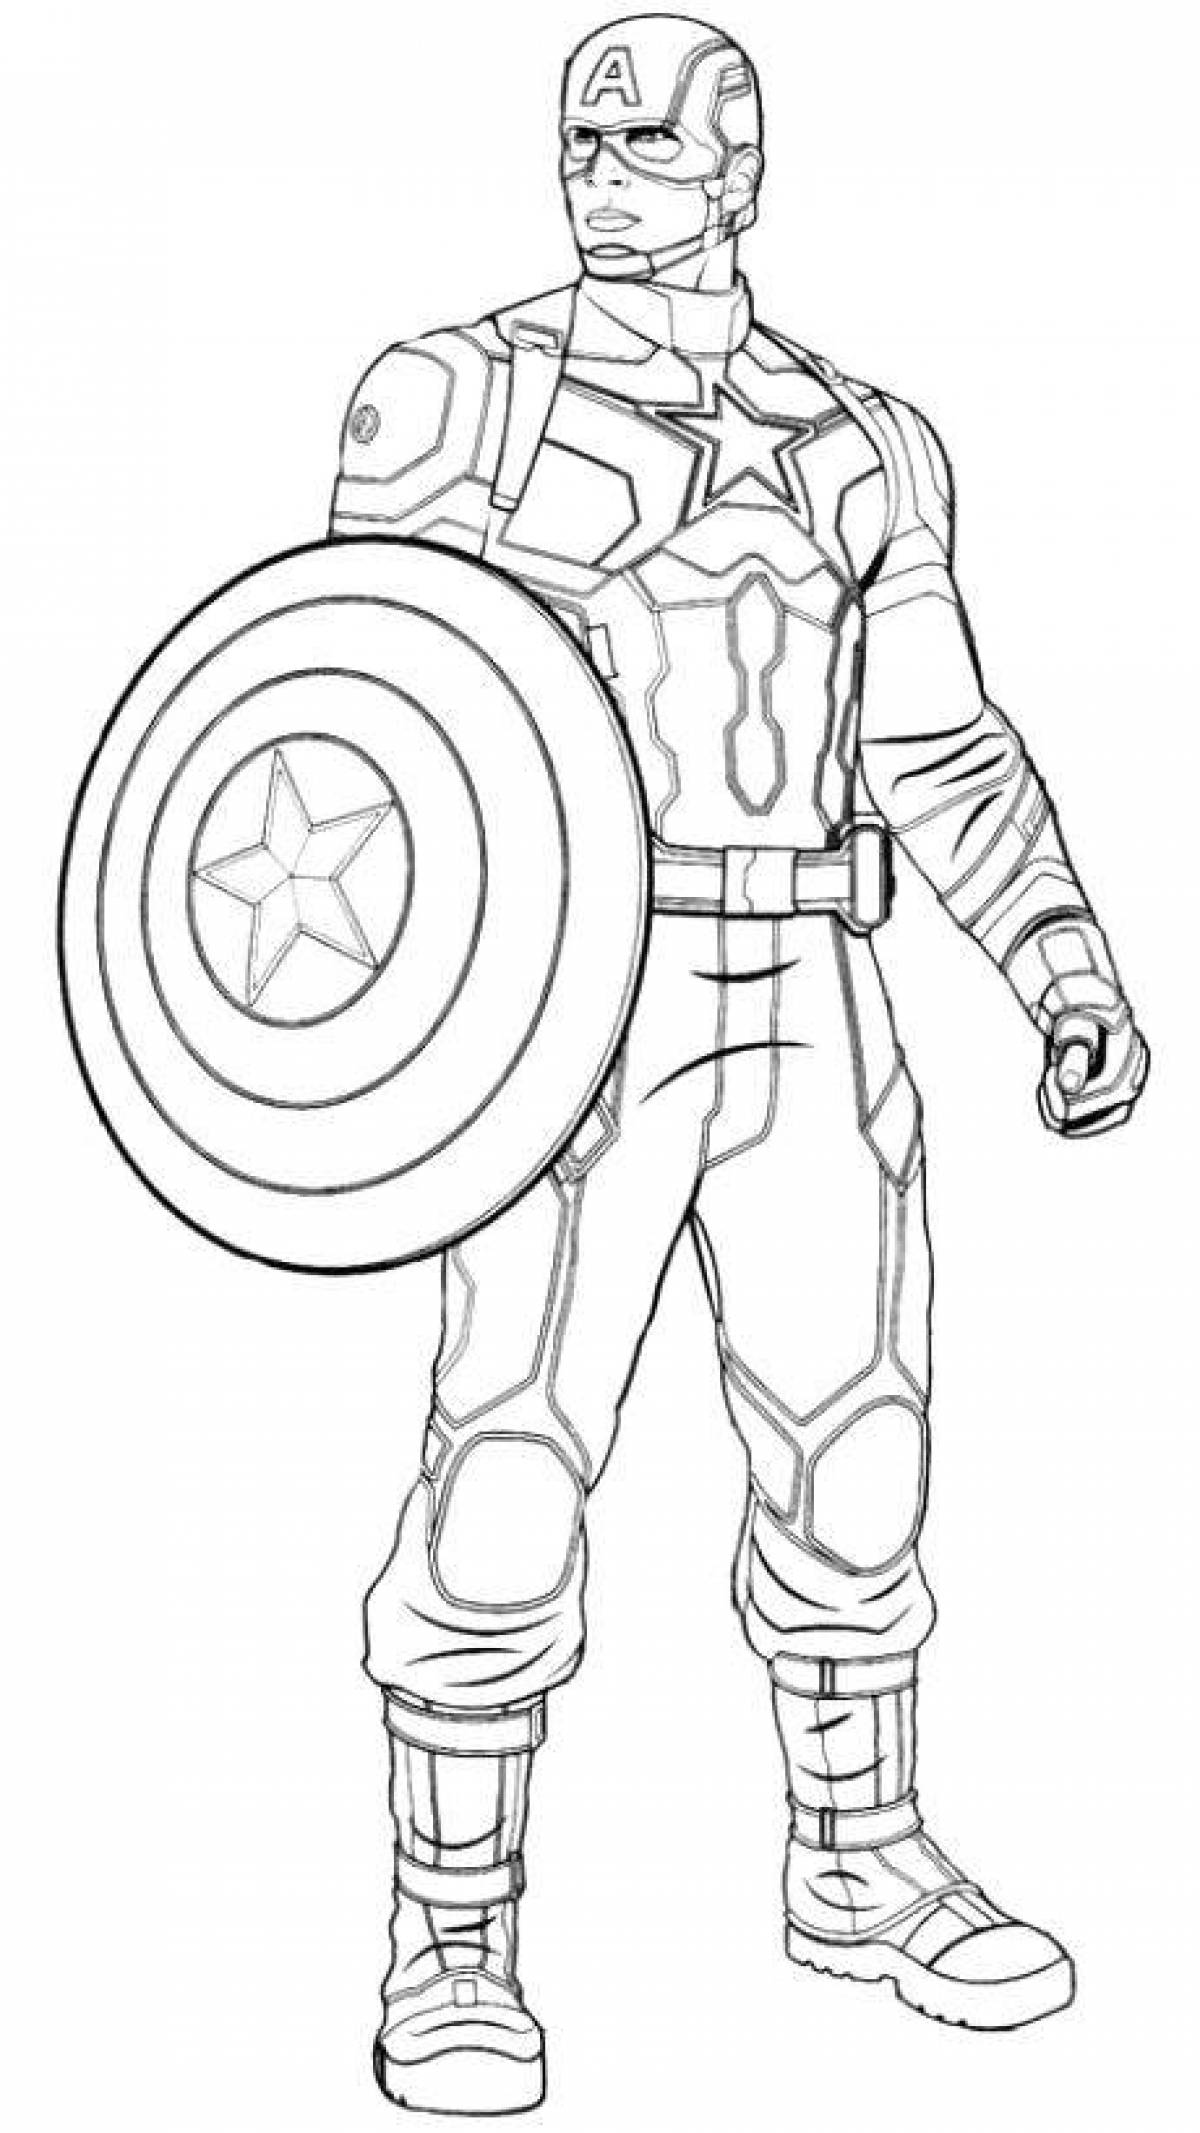 The Amazing Captain America coloring page